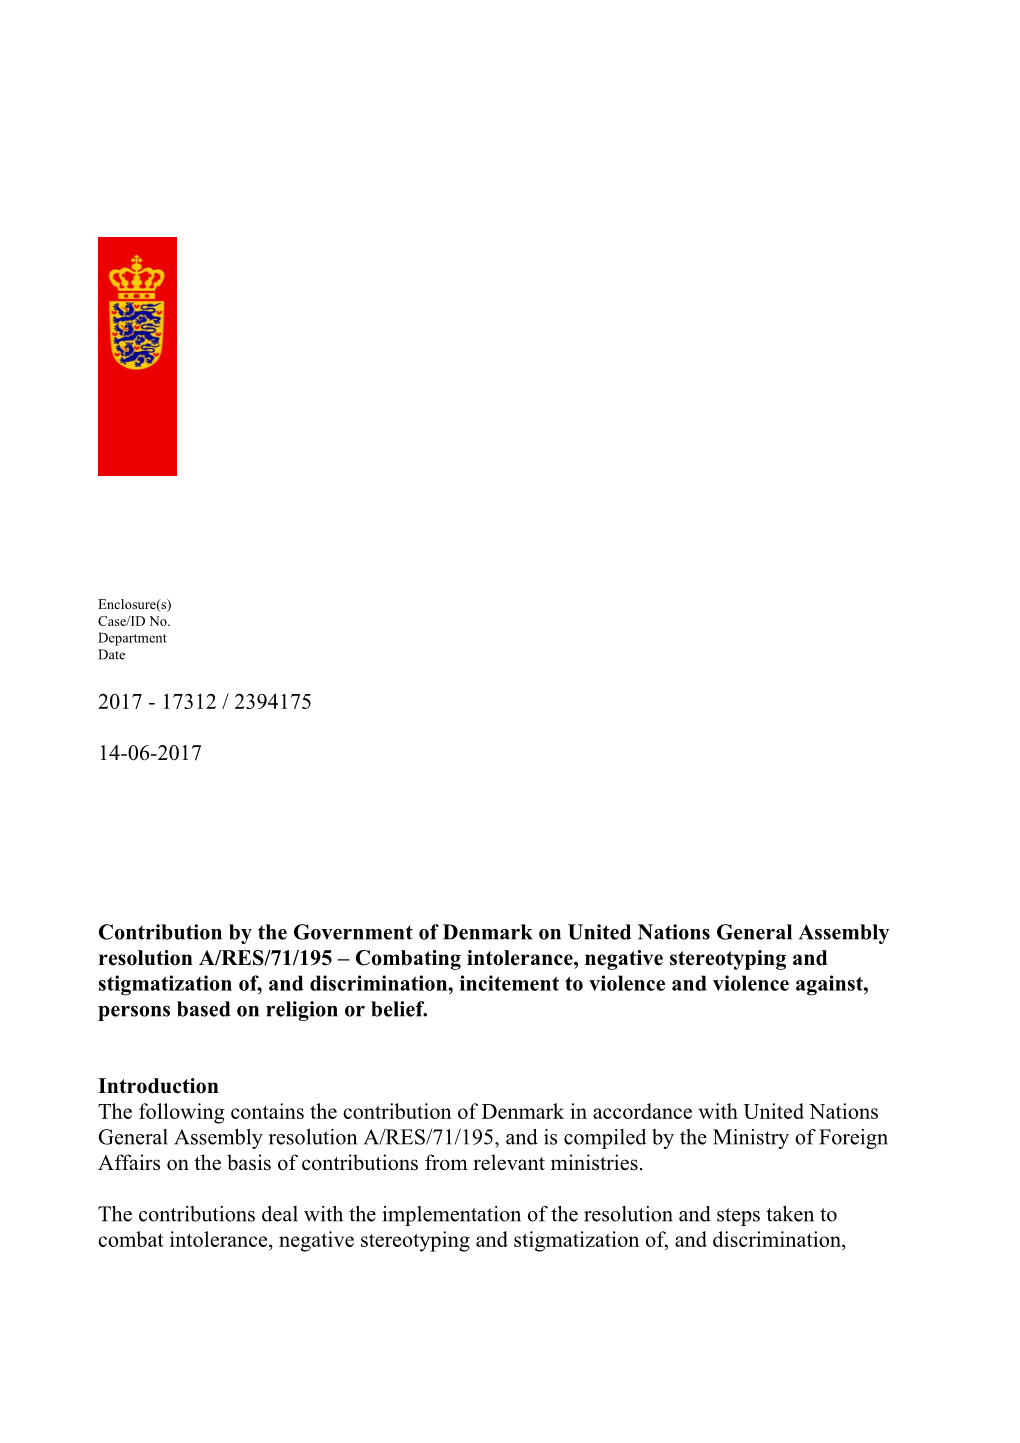 Contribution by the Government of Denmark on United Nations General Assembly Resolution